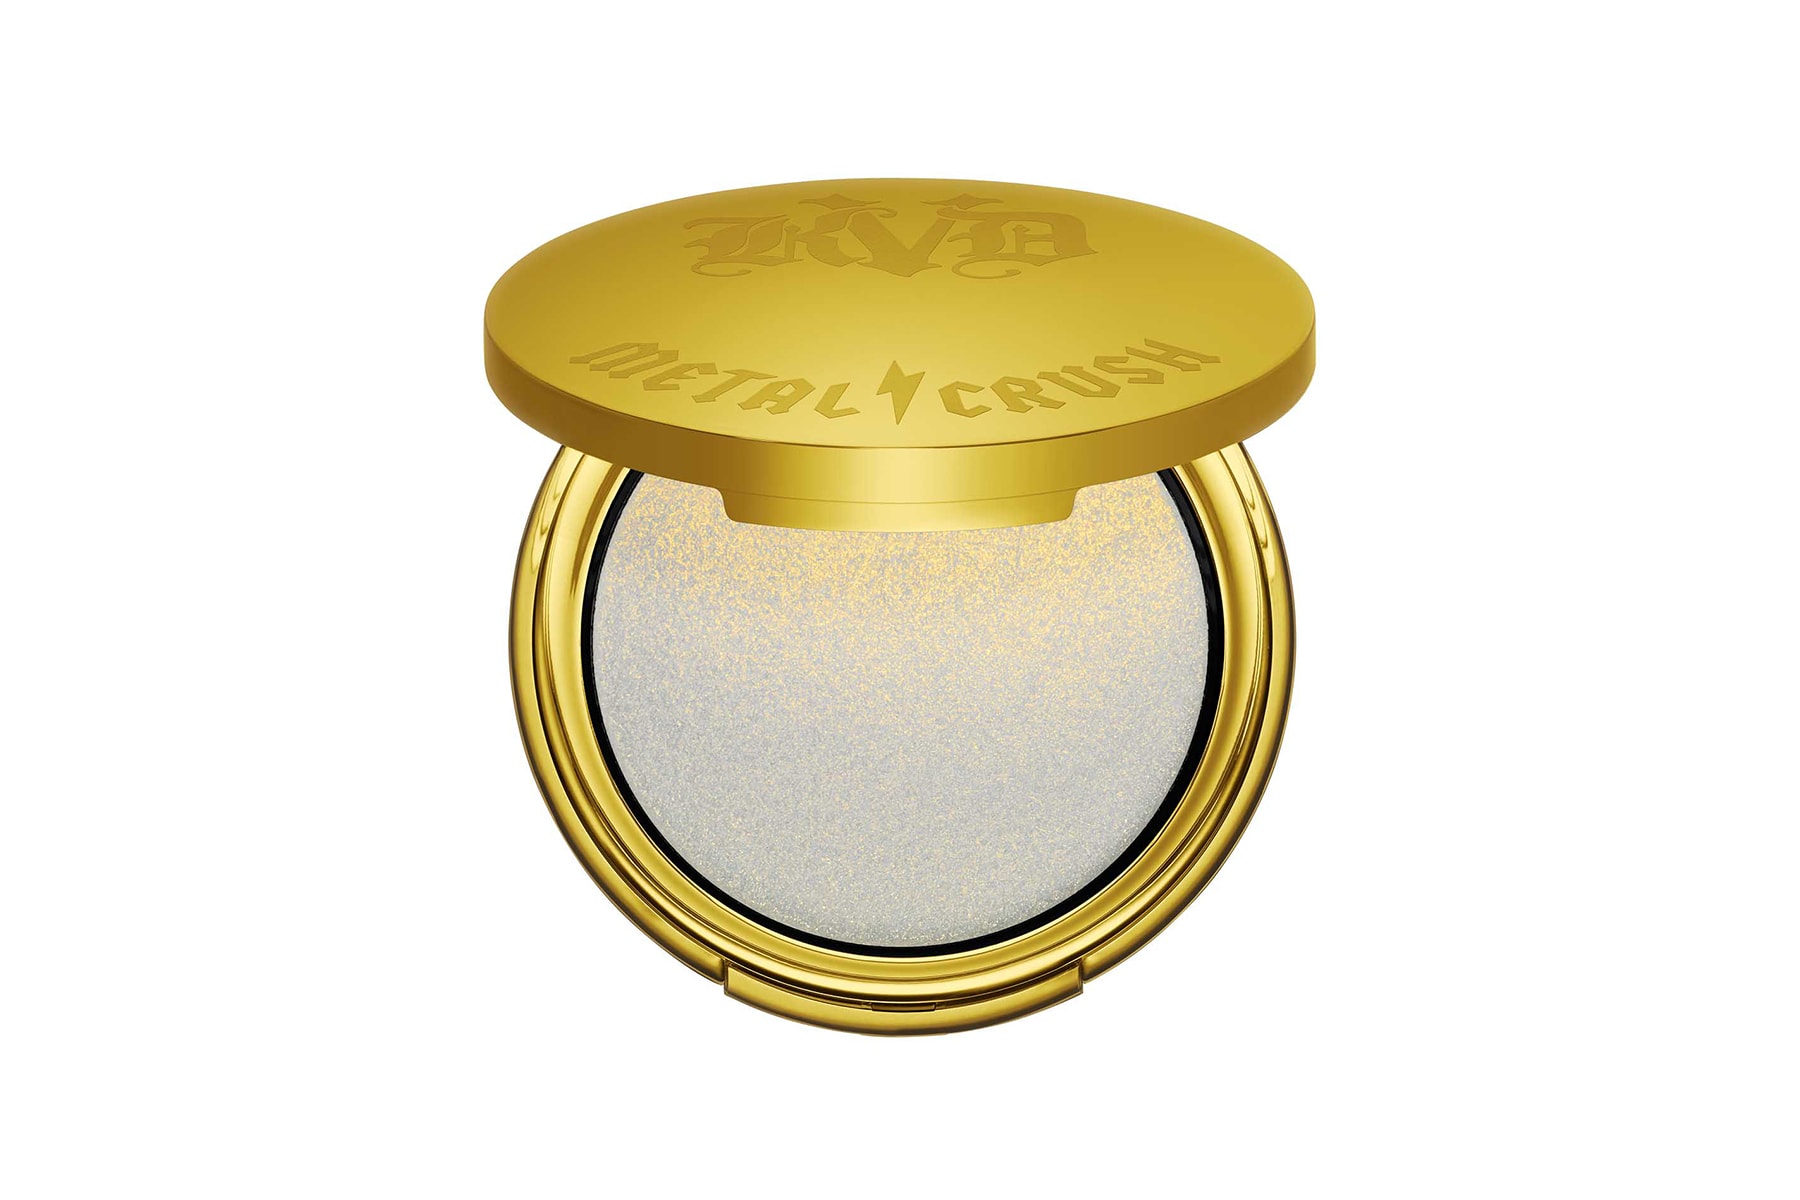 kat von d beauty 10 year anniversary makeup collection metal crush highlighter pressed powder gold